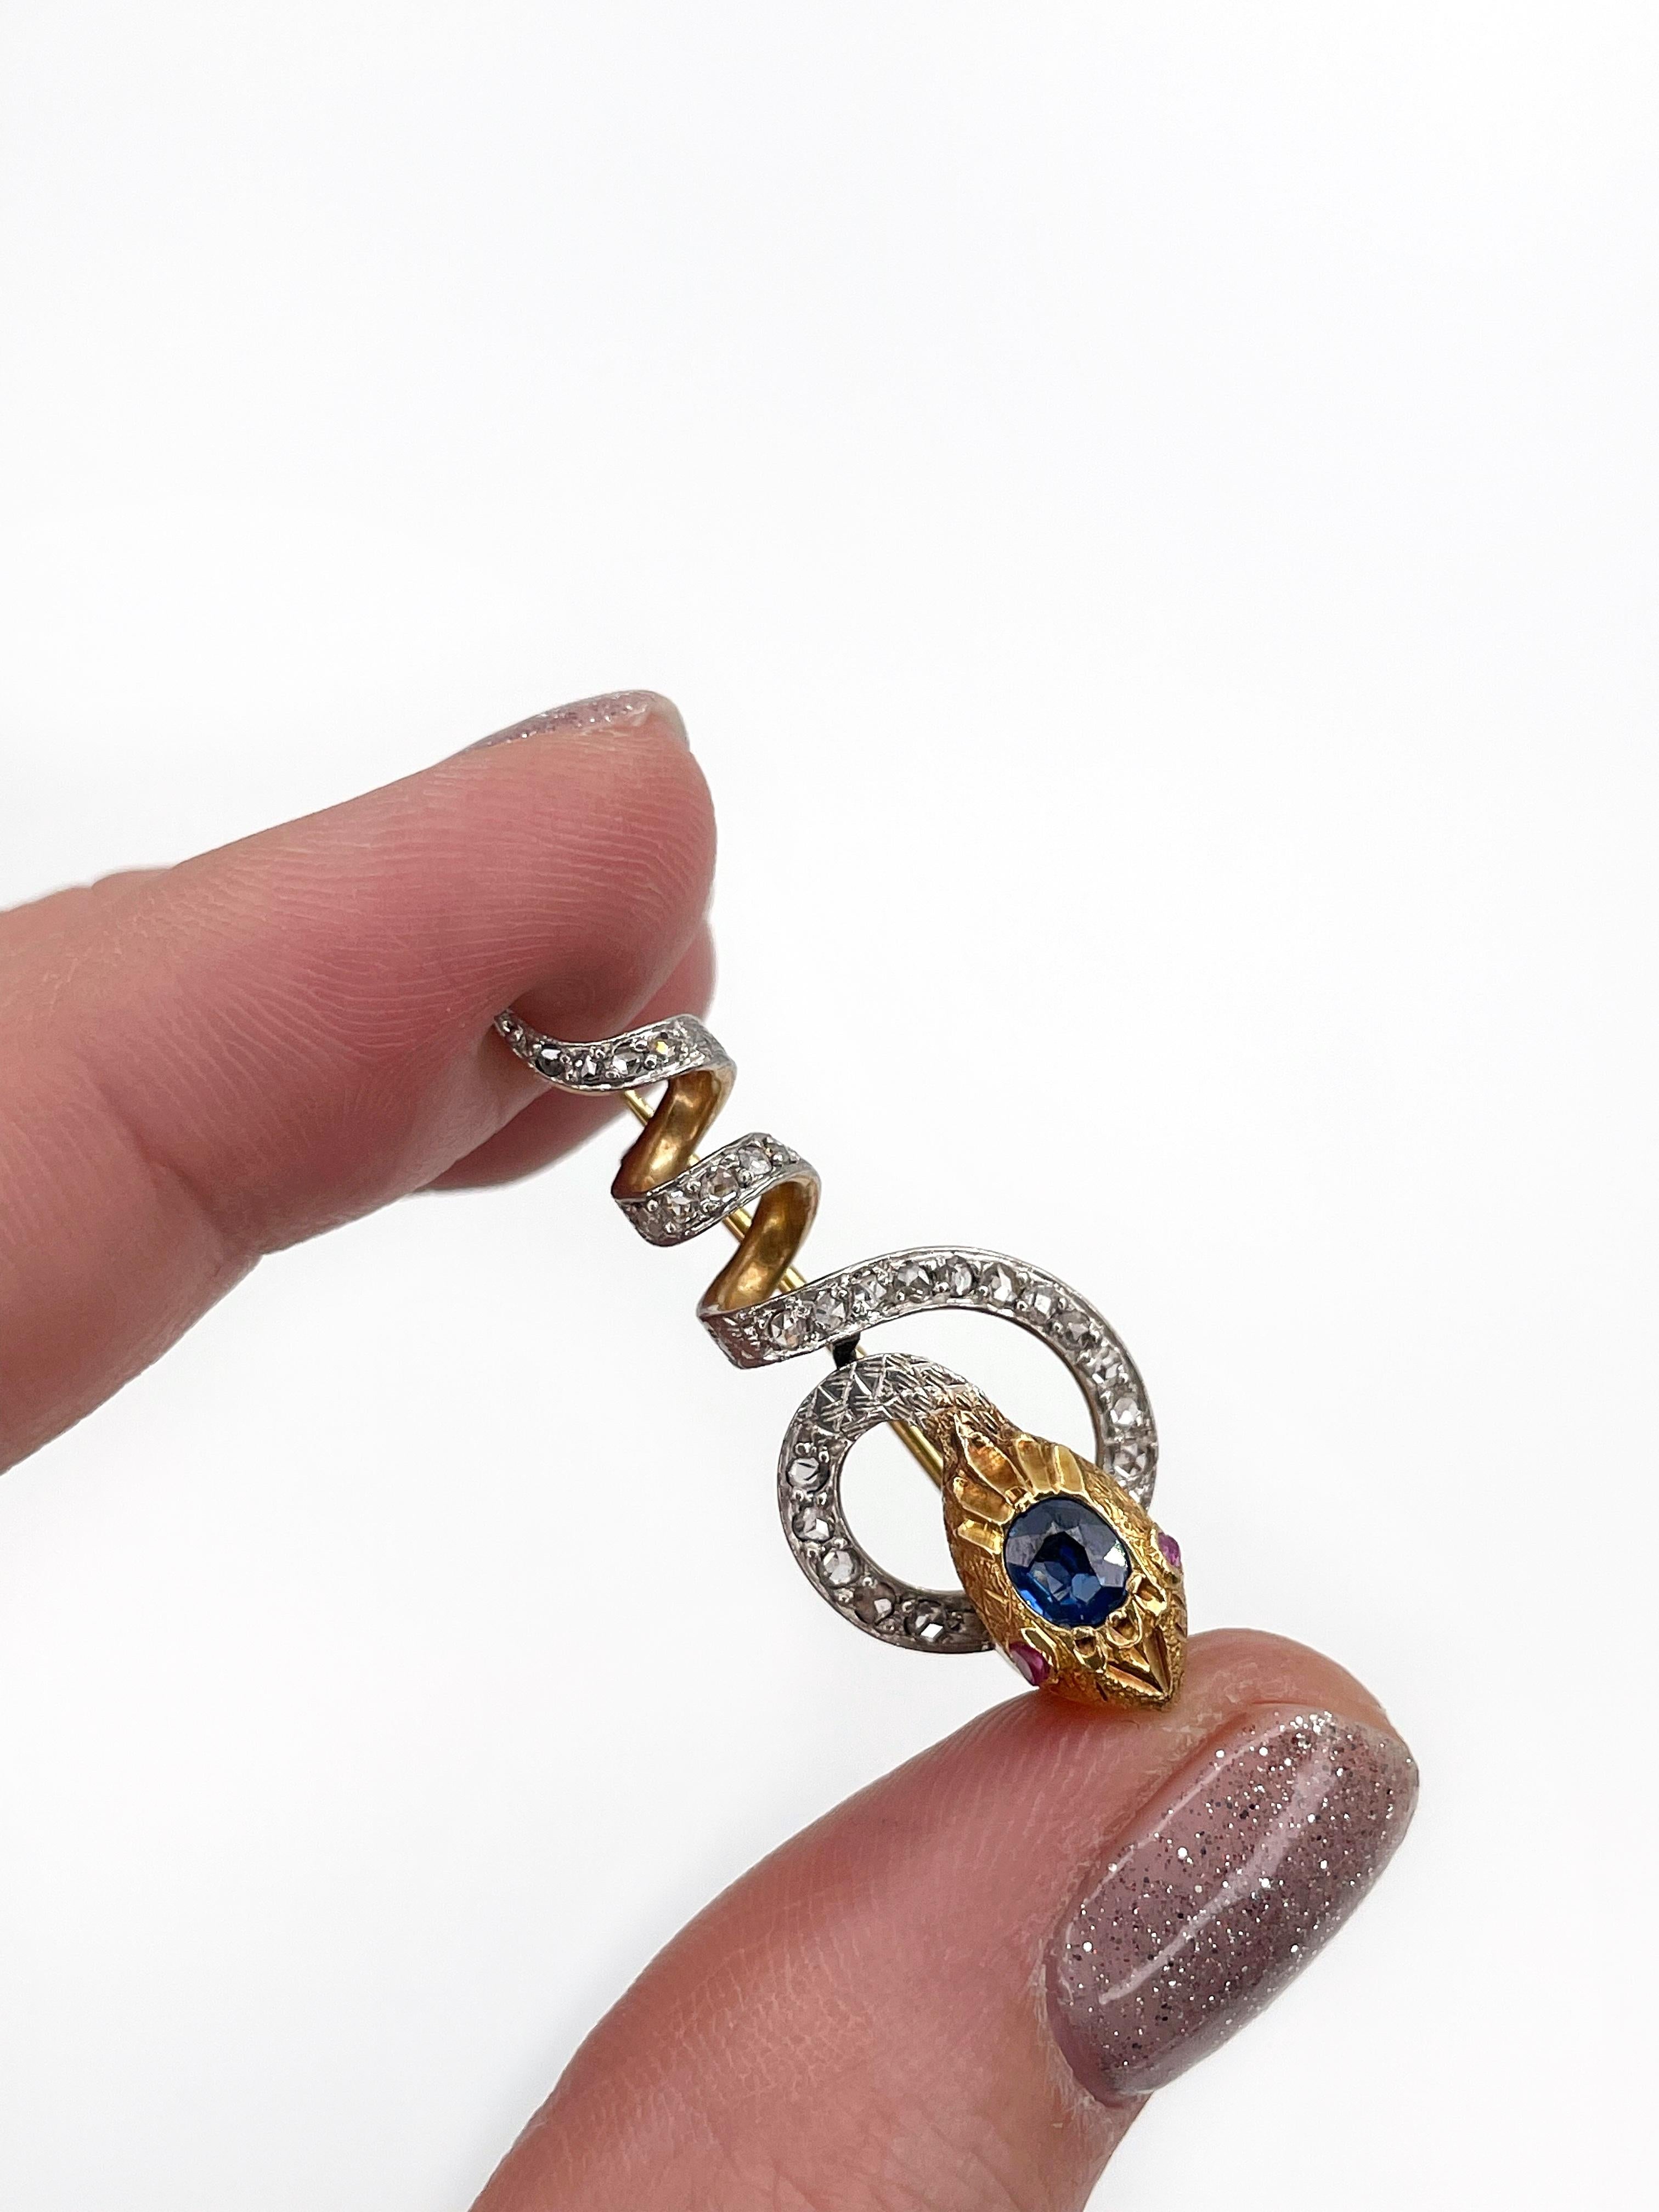 This is a beautiful antique Victorian snake pin brooch crafted in 18K gold and adorned with platinum. The piece features:
- sapphire: 1pc., oval, faceted, 0.60ct, vB 3/3, SI, H
- rubies: 2pcs., rose cut, 0.01ct, stpR 2/4, SI
- diamonds: 25pcs., rose